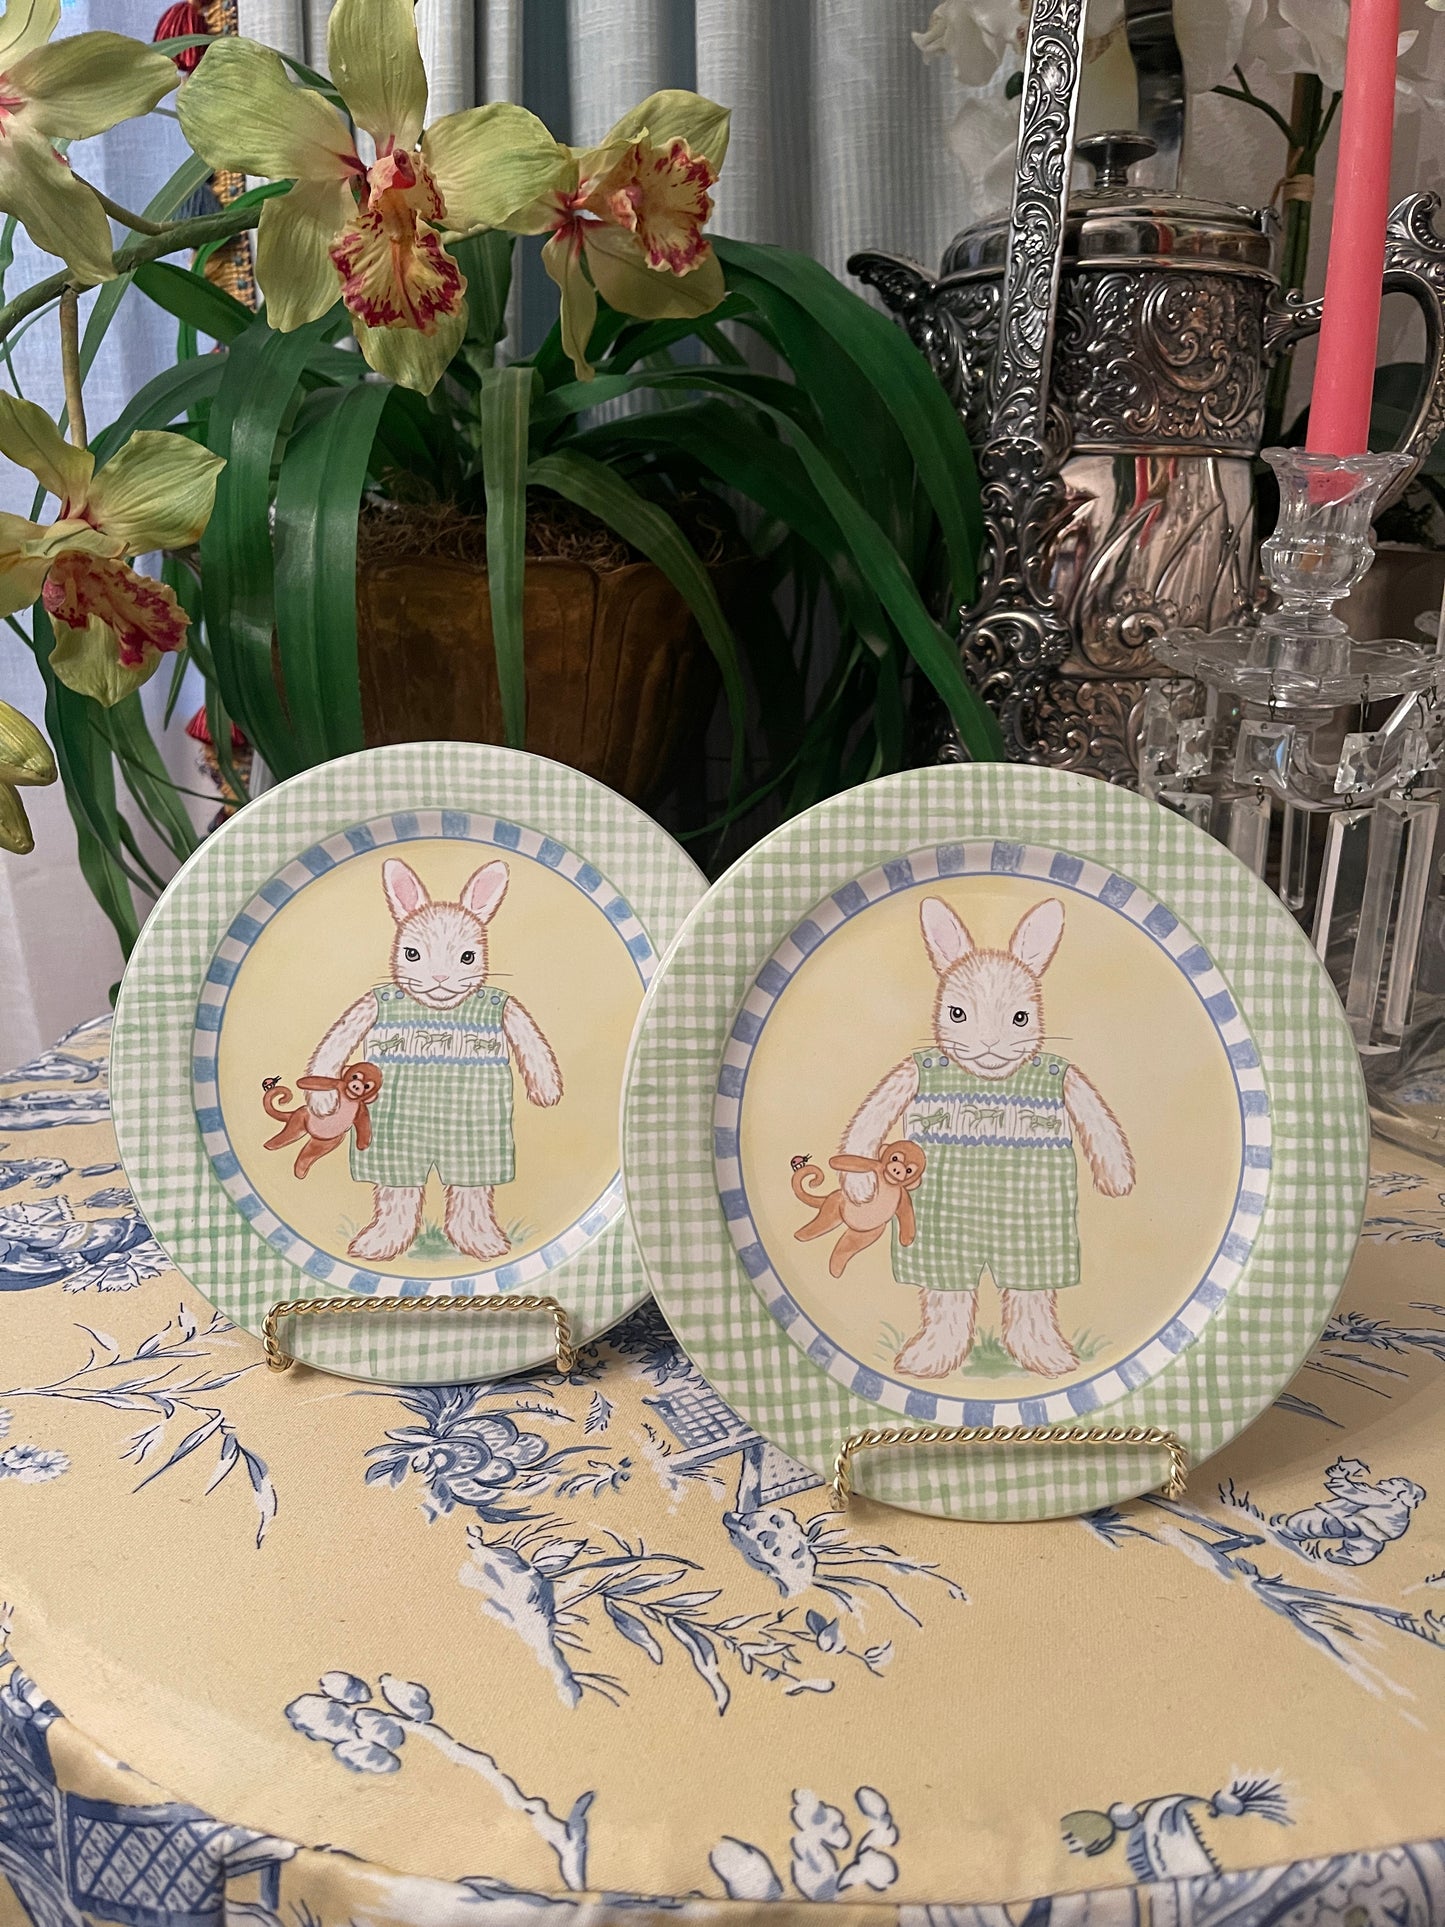 Precious Kelly B Rightsell Bunny in  Smocked Romper Plate - Green, Blue and White- Made in Portugal